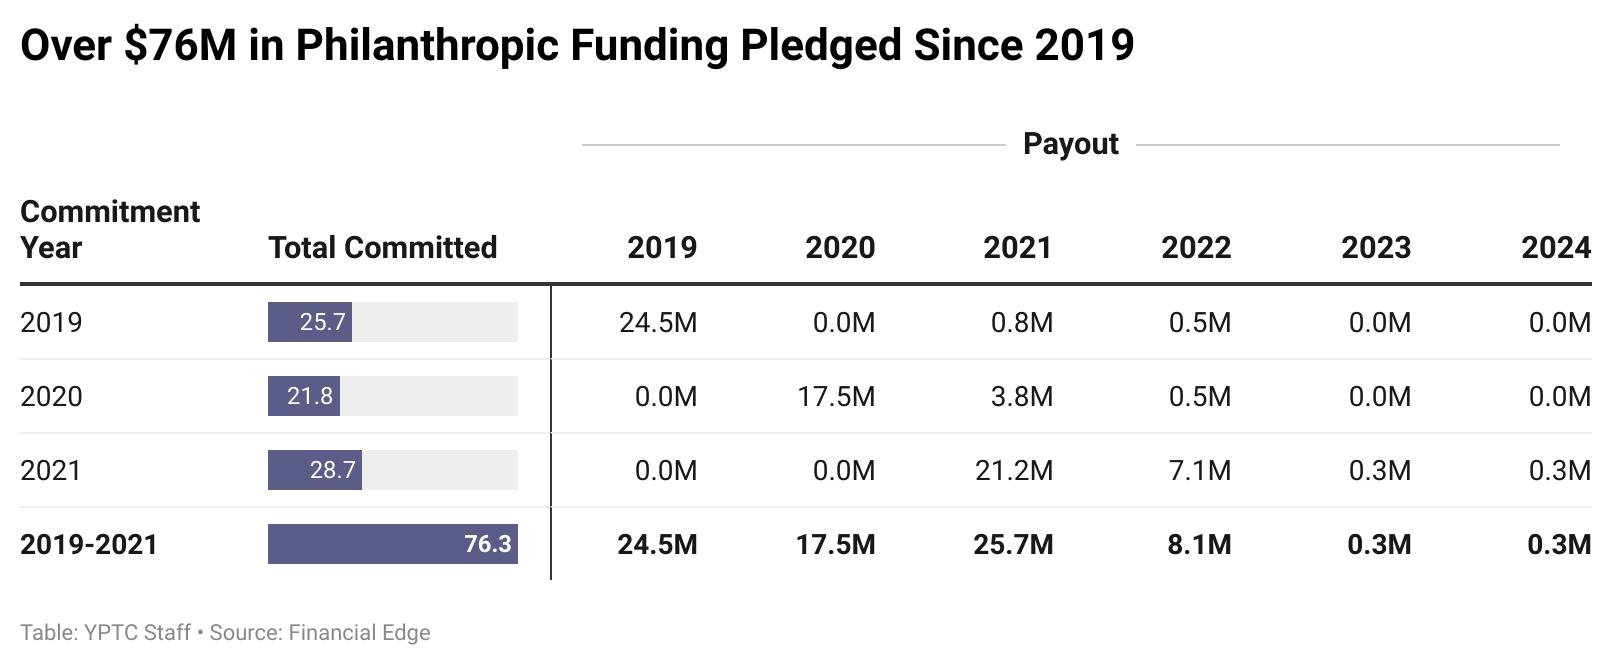 7HuKr-over-76m-in-philanthropic-funding-pledged-since-2019